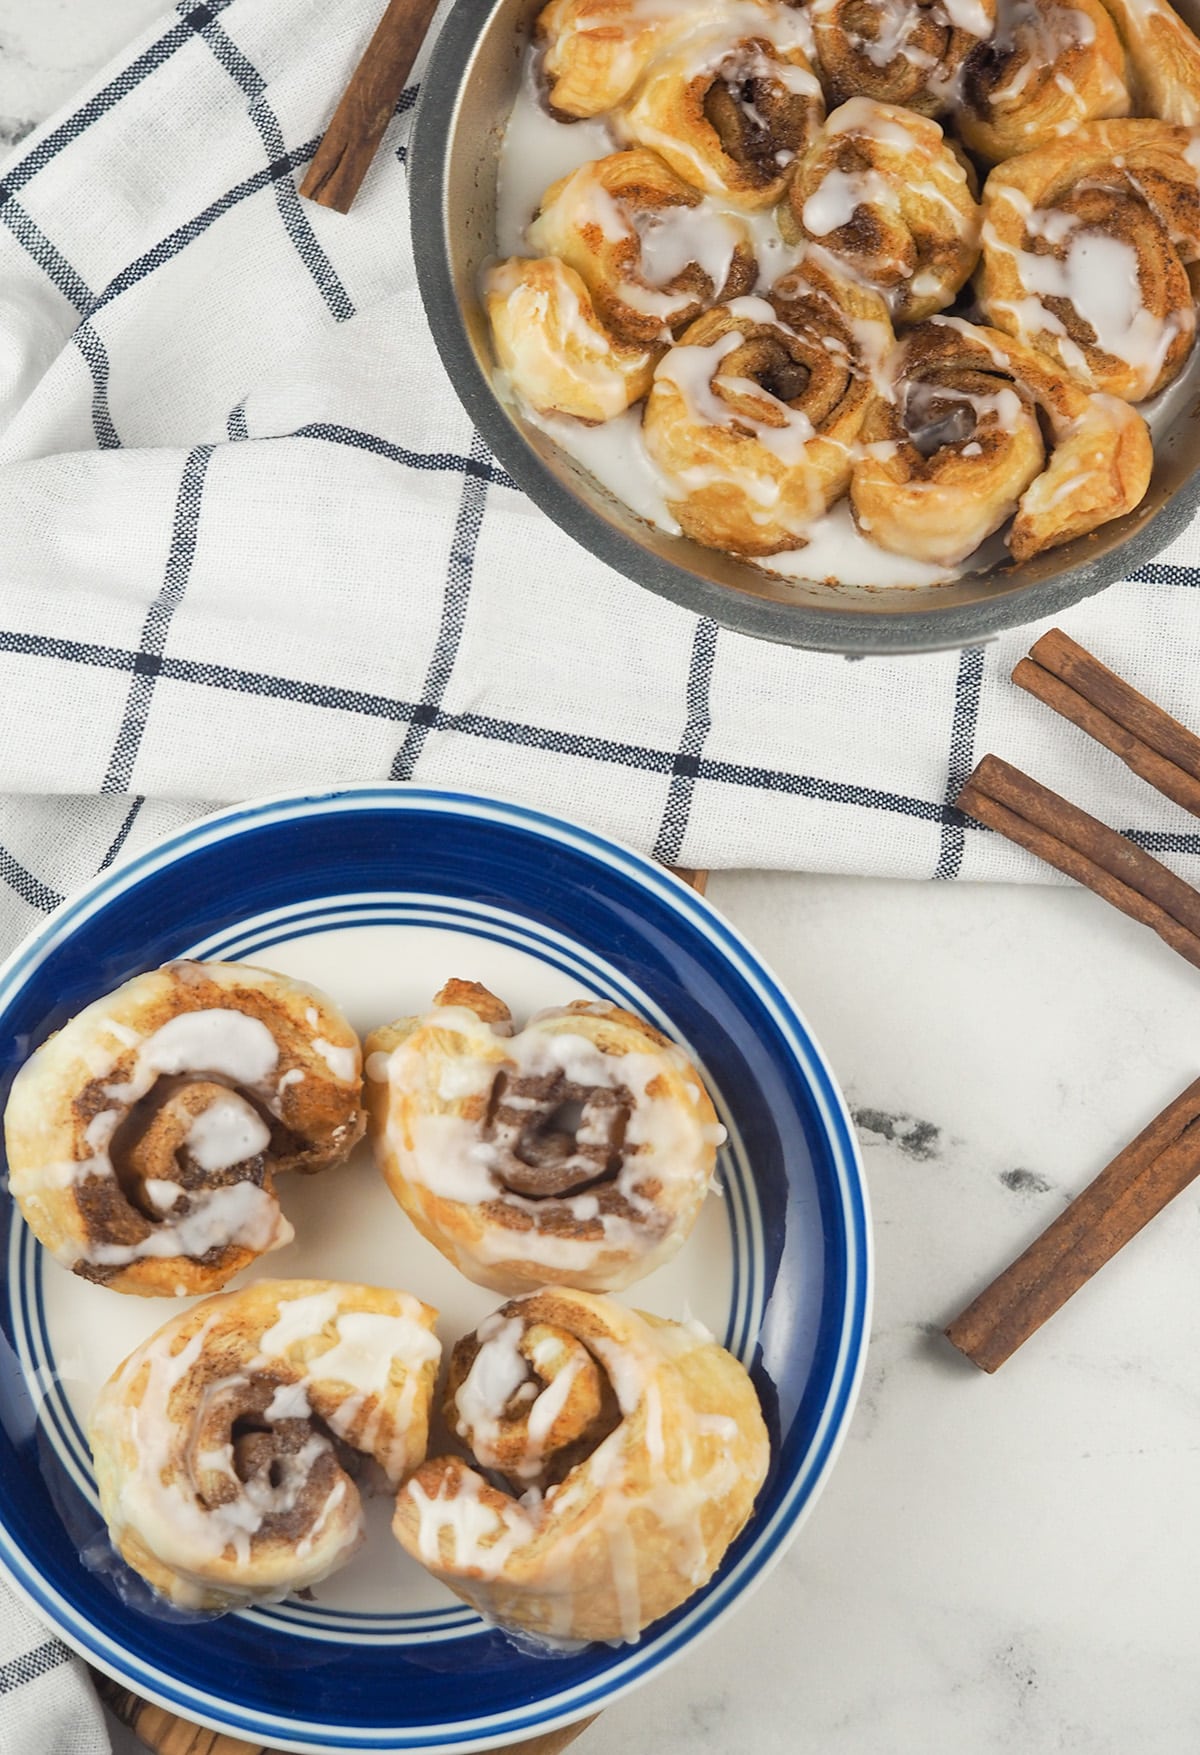 cinnamon rolls on counter with towel on plate and in pie tin with cinnamon sticks